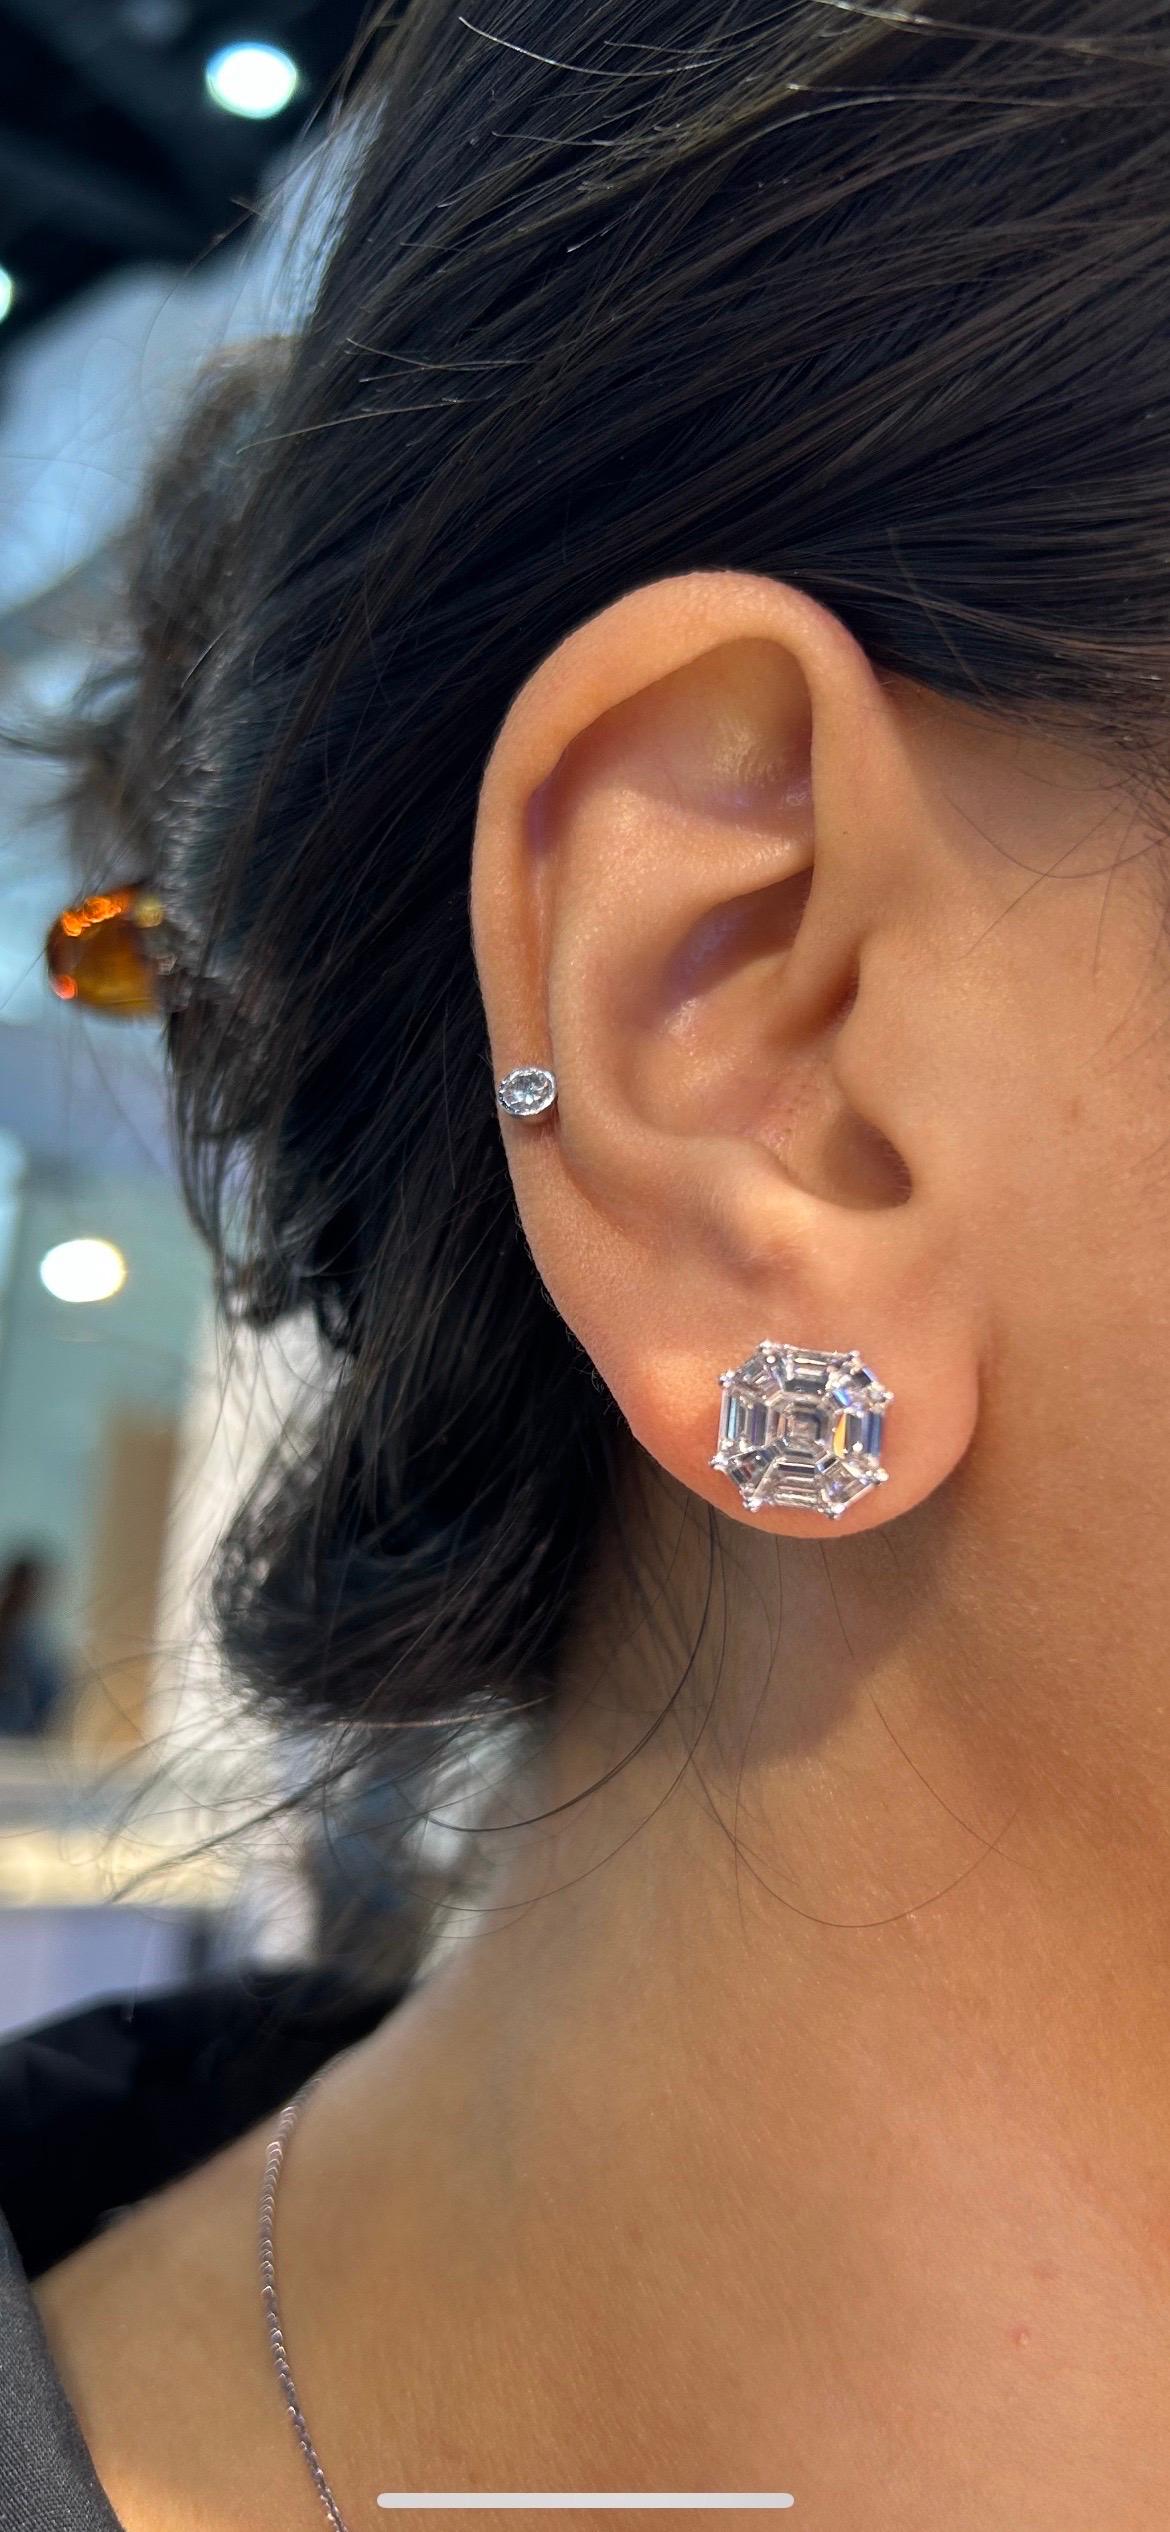 A stunning pair of 2.88 carats total F/G color, VVS/VS quality Diamond studs, set in solid 18K White Gold. The earrings look like 5 carat each square emerald cut diamonds. The pressure setting of baguettes and trapezoids are of top quality, and the